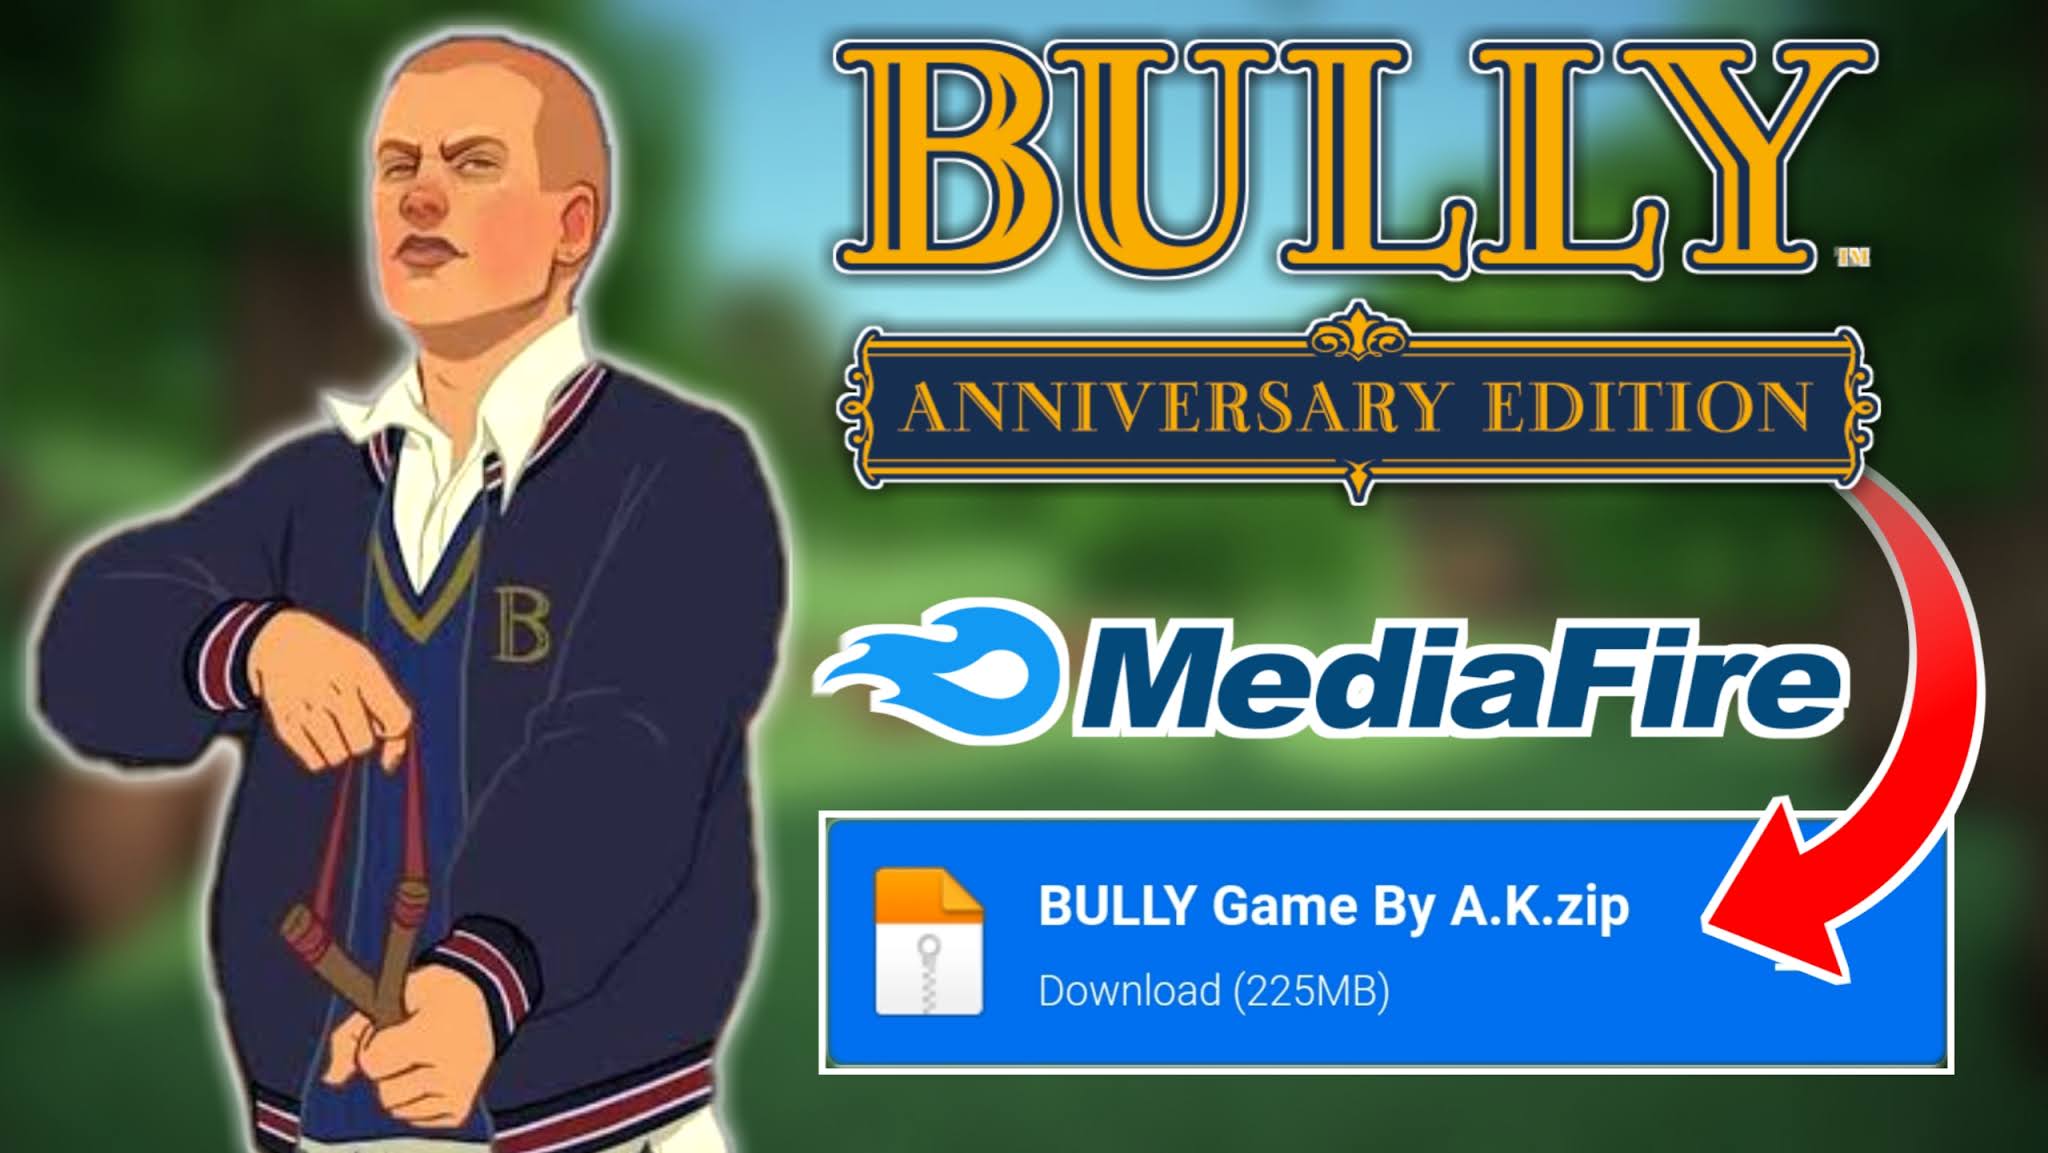 Gaming Update Tricks - [400MB] Bully Anniversary Edition APK+OBB Download  Highly Compressed Game On Android : Full Video watch Link :  👇